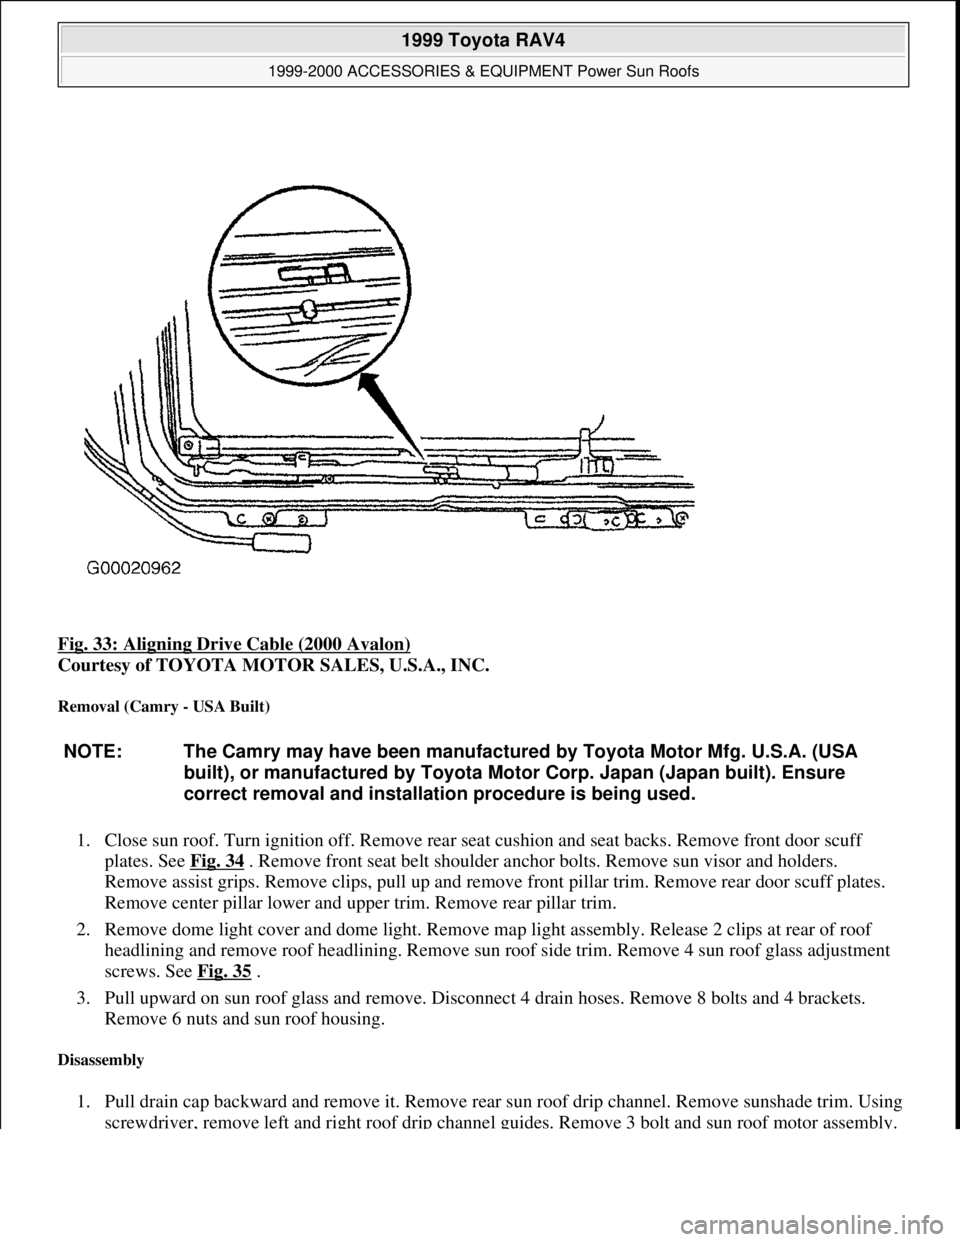 TOYOTA RAV4 1996  Service Repair Manual Fig. 33: Aligning Drive Cable (2000 Avalon) 
Courtesy of TOYOTA MOTOR SALES, U.S.A., INC. 
Removal (Camry - USA Built) 
1. Close sun roof. Turn ignition off. Remove rear seat cushion and seat backs. R